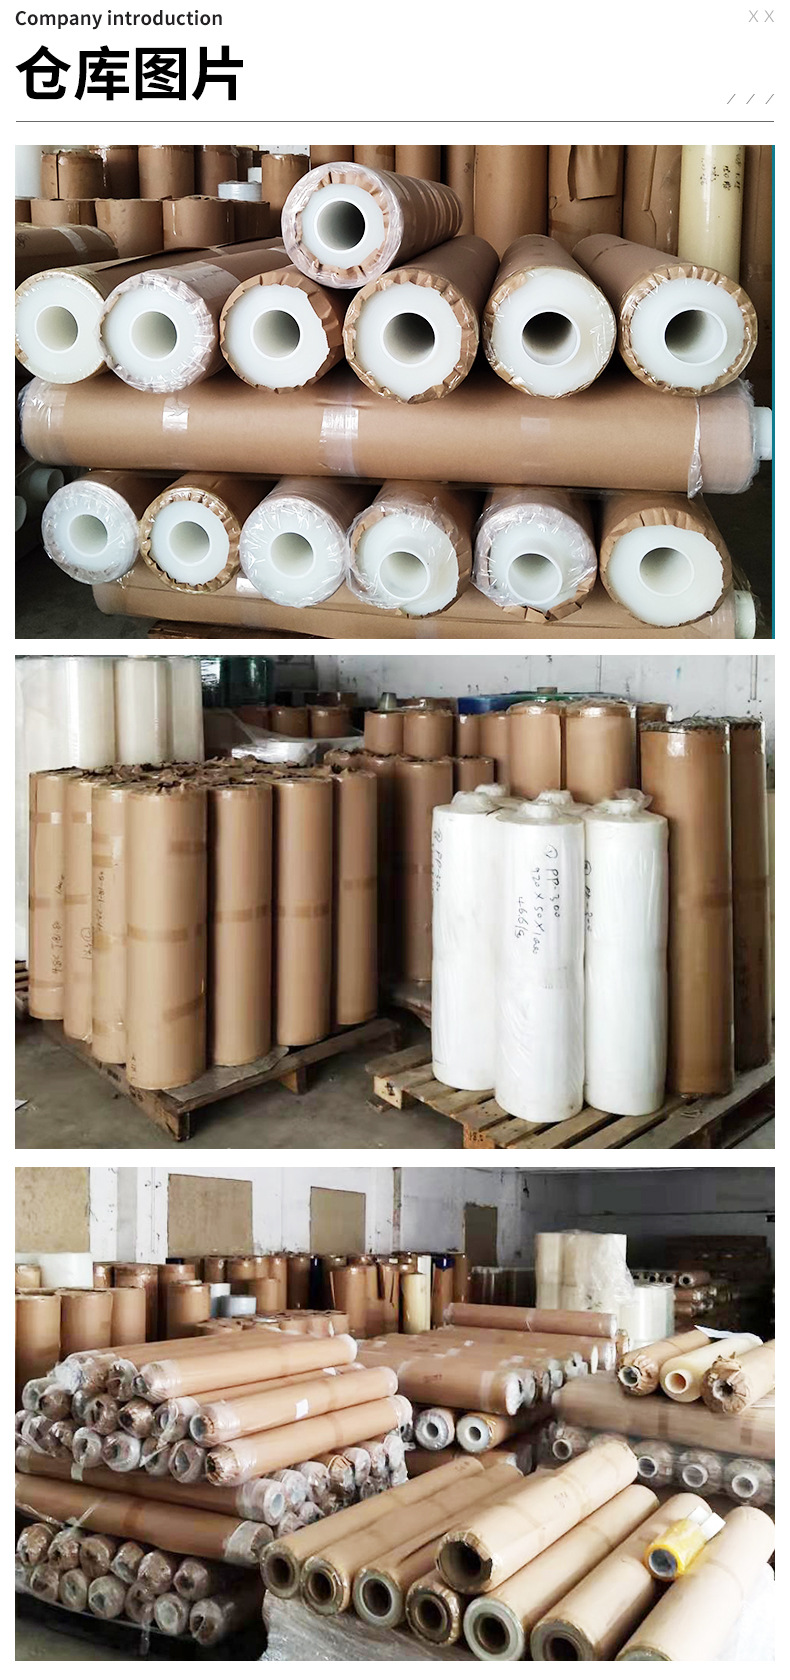 PE mesh film 8C mesh film Low mucosal high gloss plastic product surface protection Transparent non imprinting film